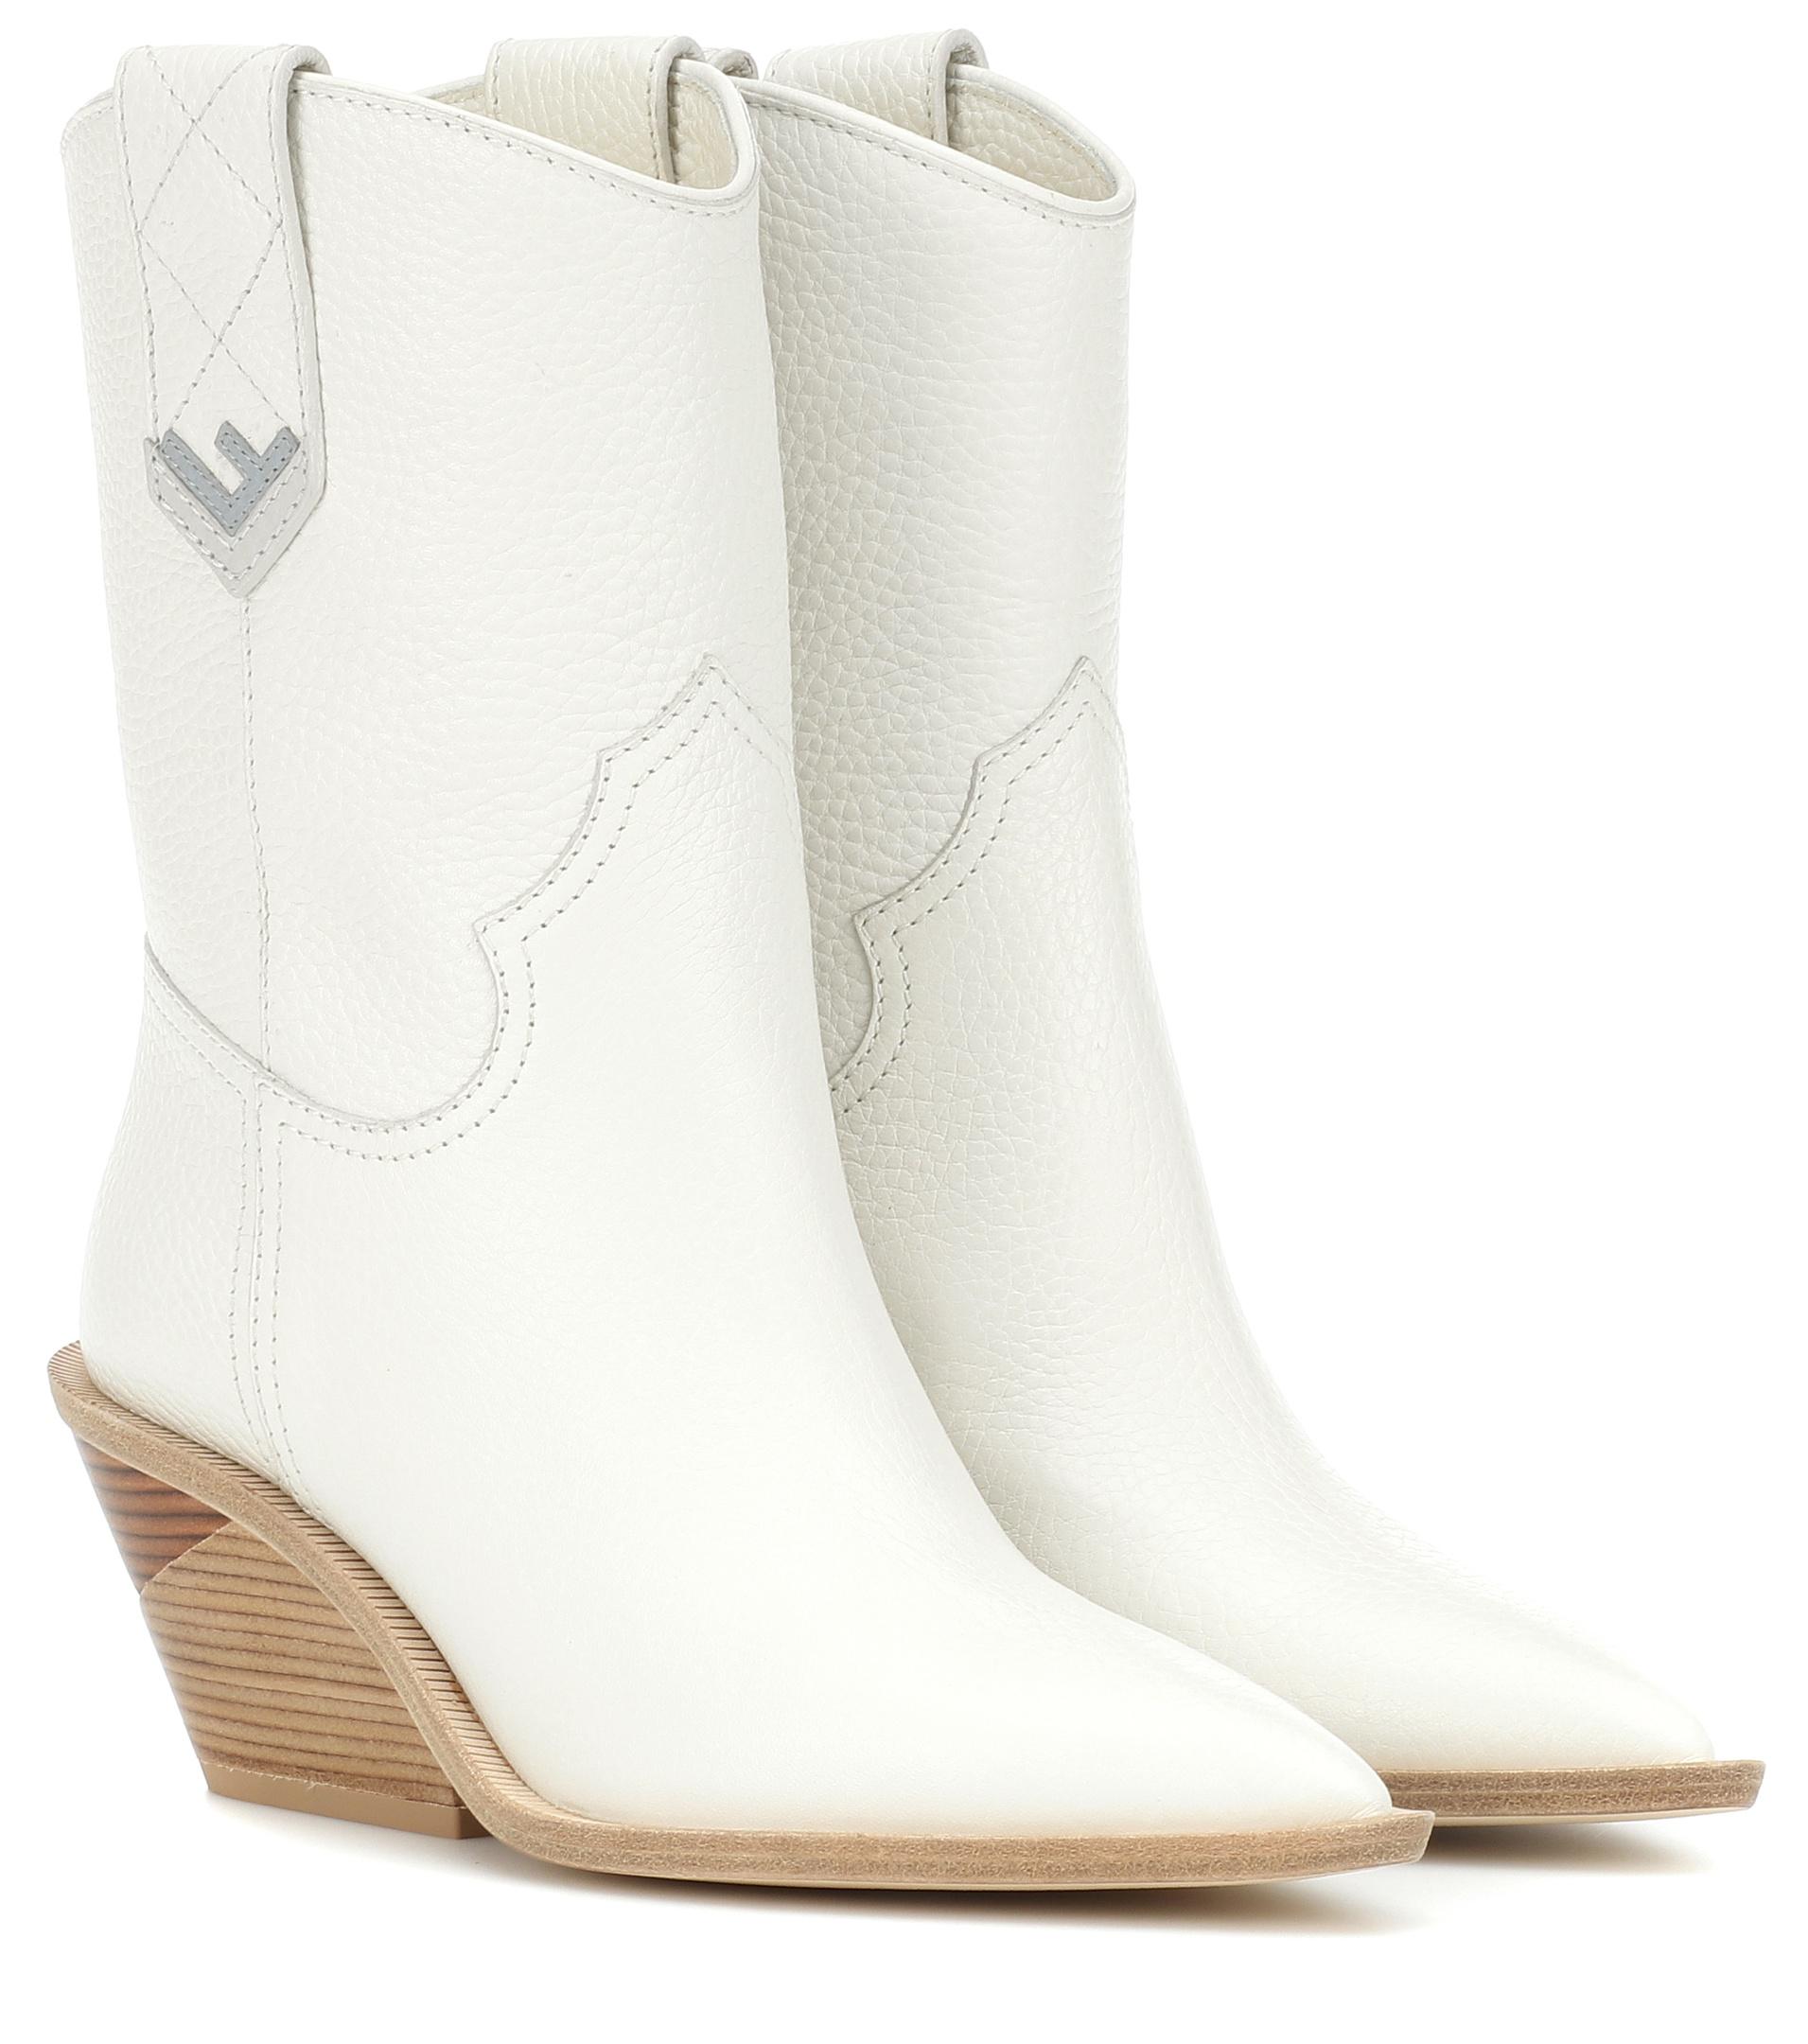 Fendi Leather Cowboy Boots in White - Lyst